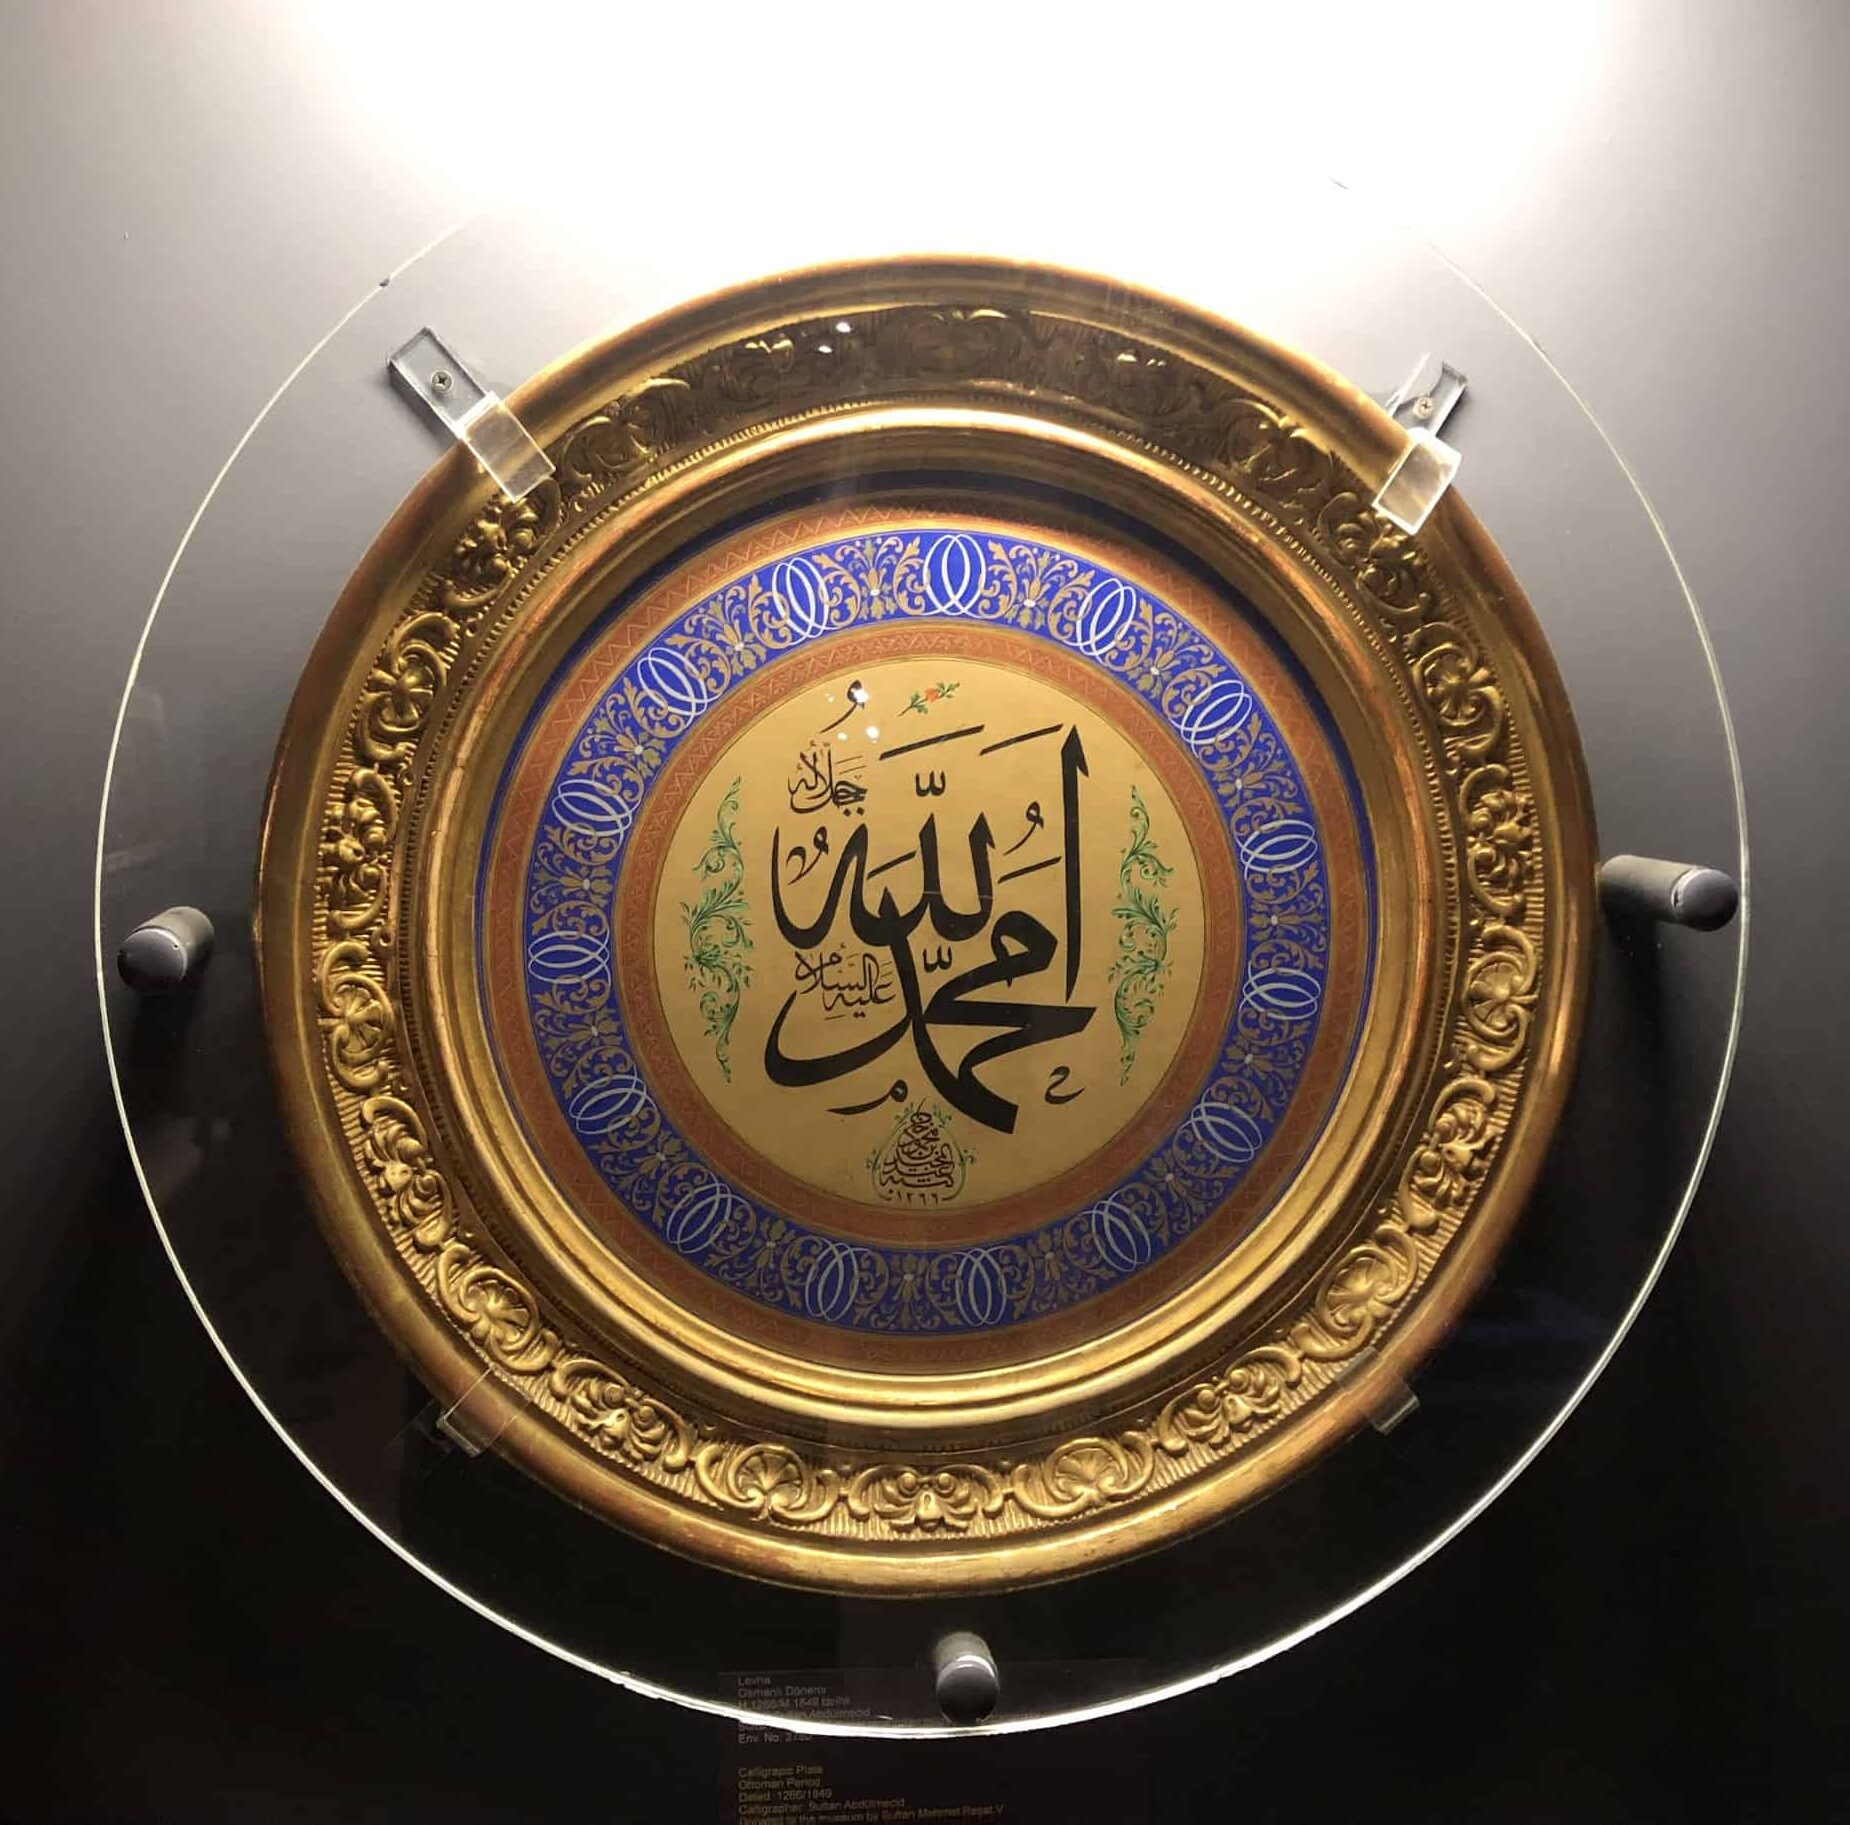 Calligraphic plate made by Sultan Abdülmecid I in 1849 in the Holy Relics at the Museum of Turkish and Islamic Arts in Istanbul, Turkey